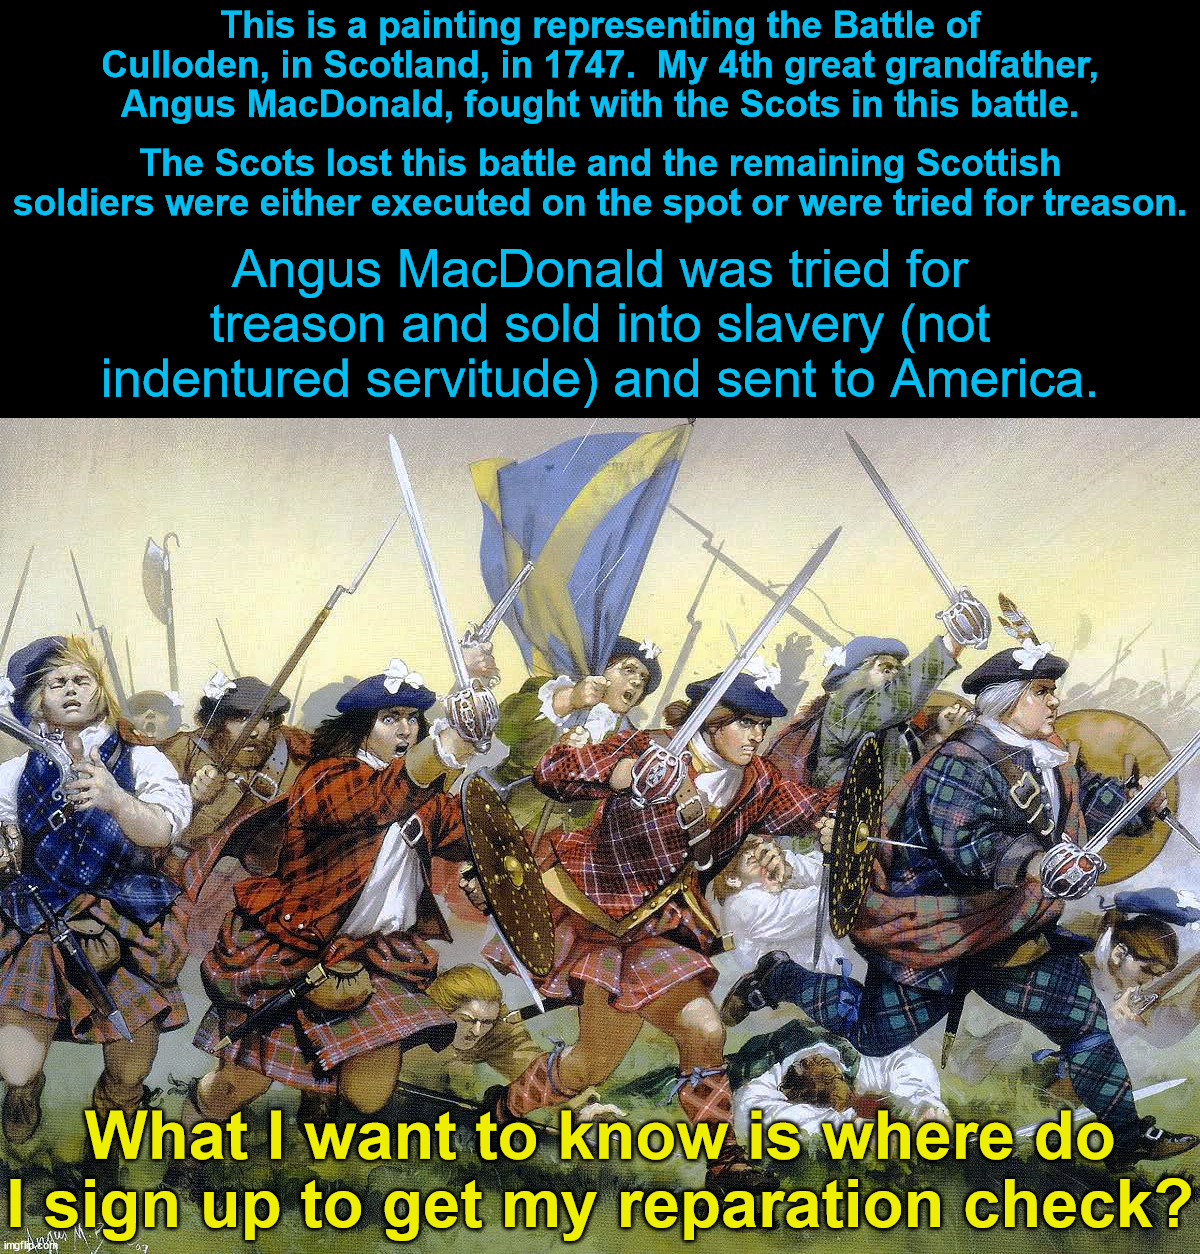 True story.  Angus MacDonald really is my 4th great grandfather and he came to America as a slave. | This is a painting representing the Battle of Culloden, in Scotland, in 1747.  My 4th great grandfather, Angus MacDonald, fought with the Scots in this battle. The Scots lost this battle and the remaining Scottish soldiers were either executed on the spot or were tried for treason. Angus MacDonald was tried for treason and sold into slavery (not indentured servitude) and sent to America. What I want to know is where do I sign up to get my reparation check? | image tagged in slavery,reparations,battle of culloden | made w/ Imgflip meme maker